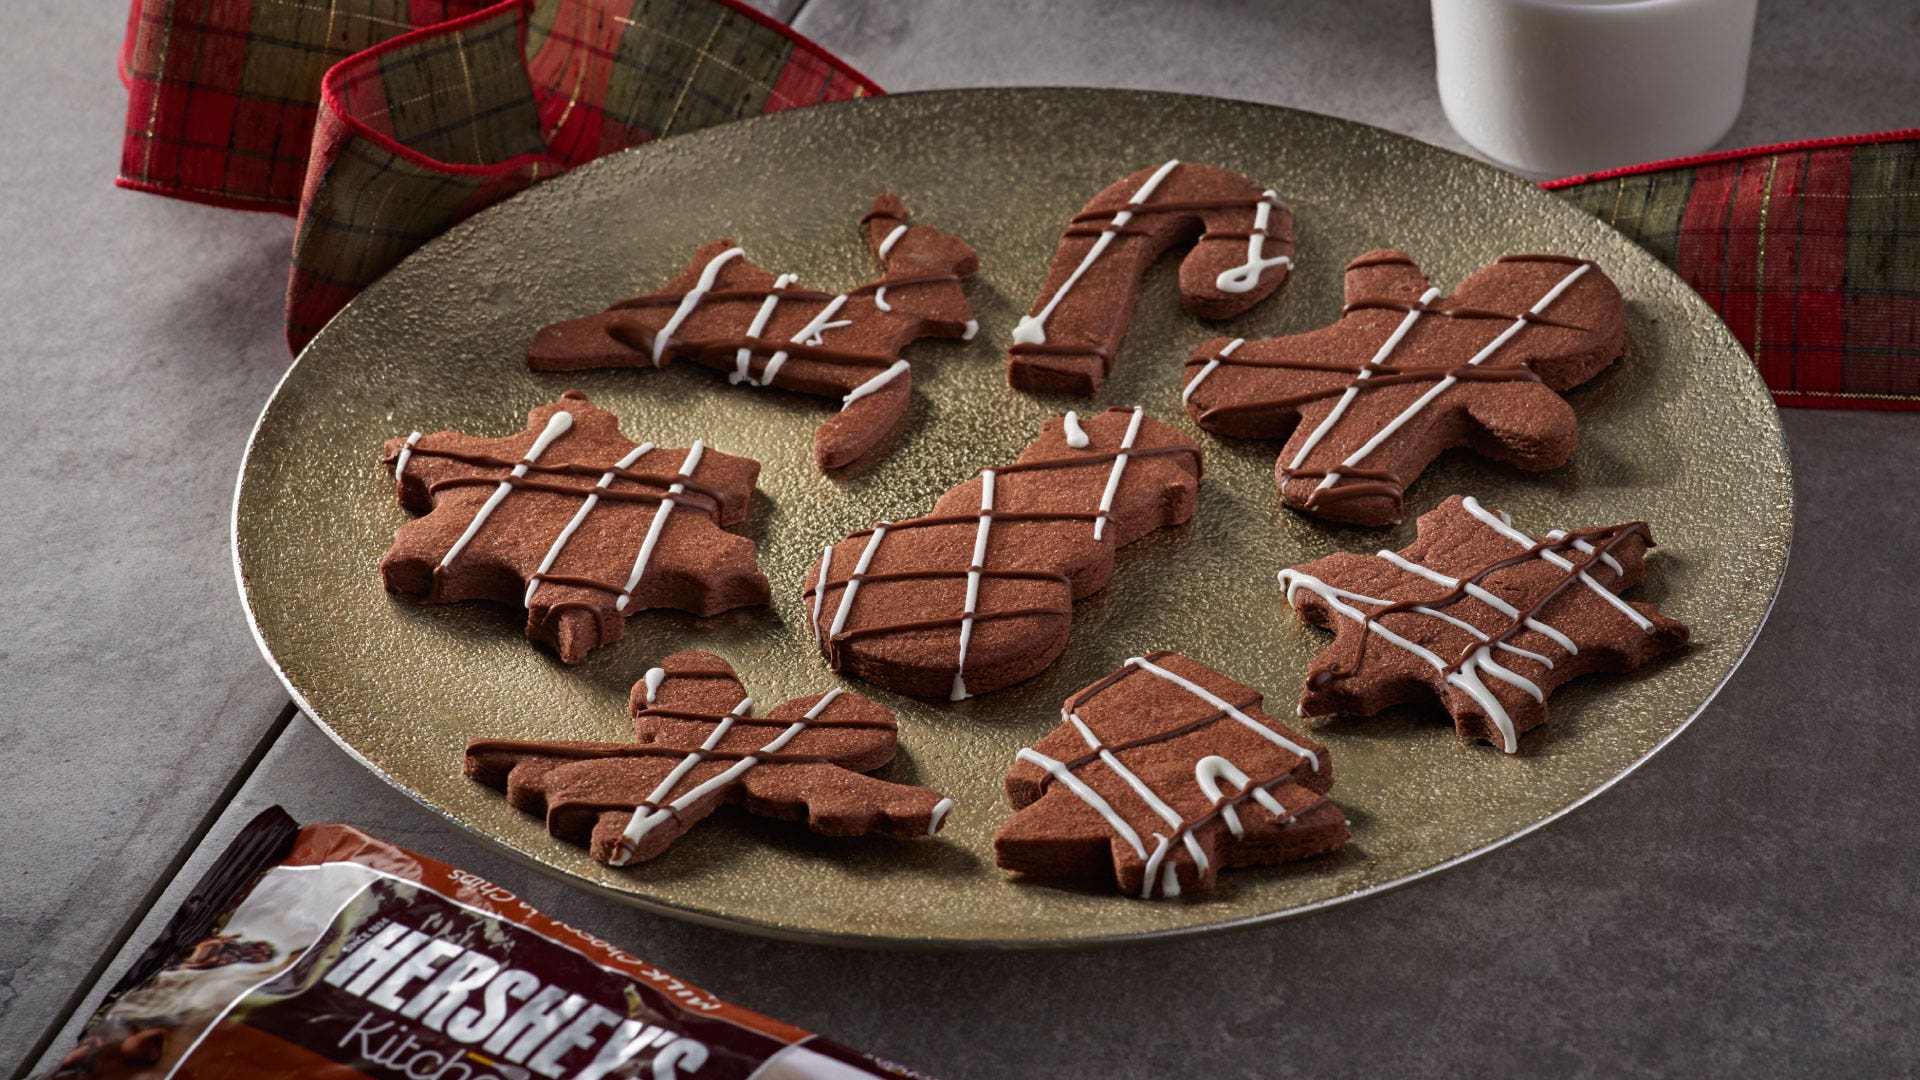 chocolate cut out cookies